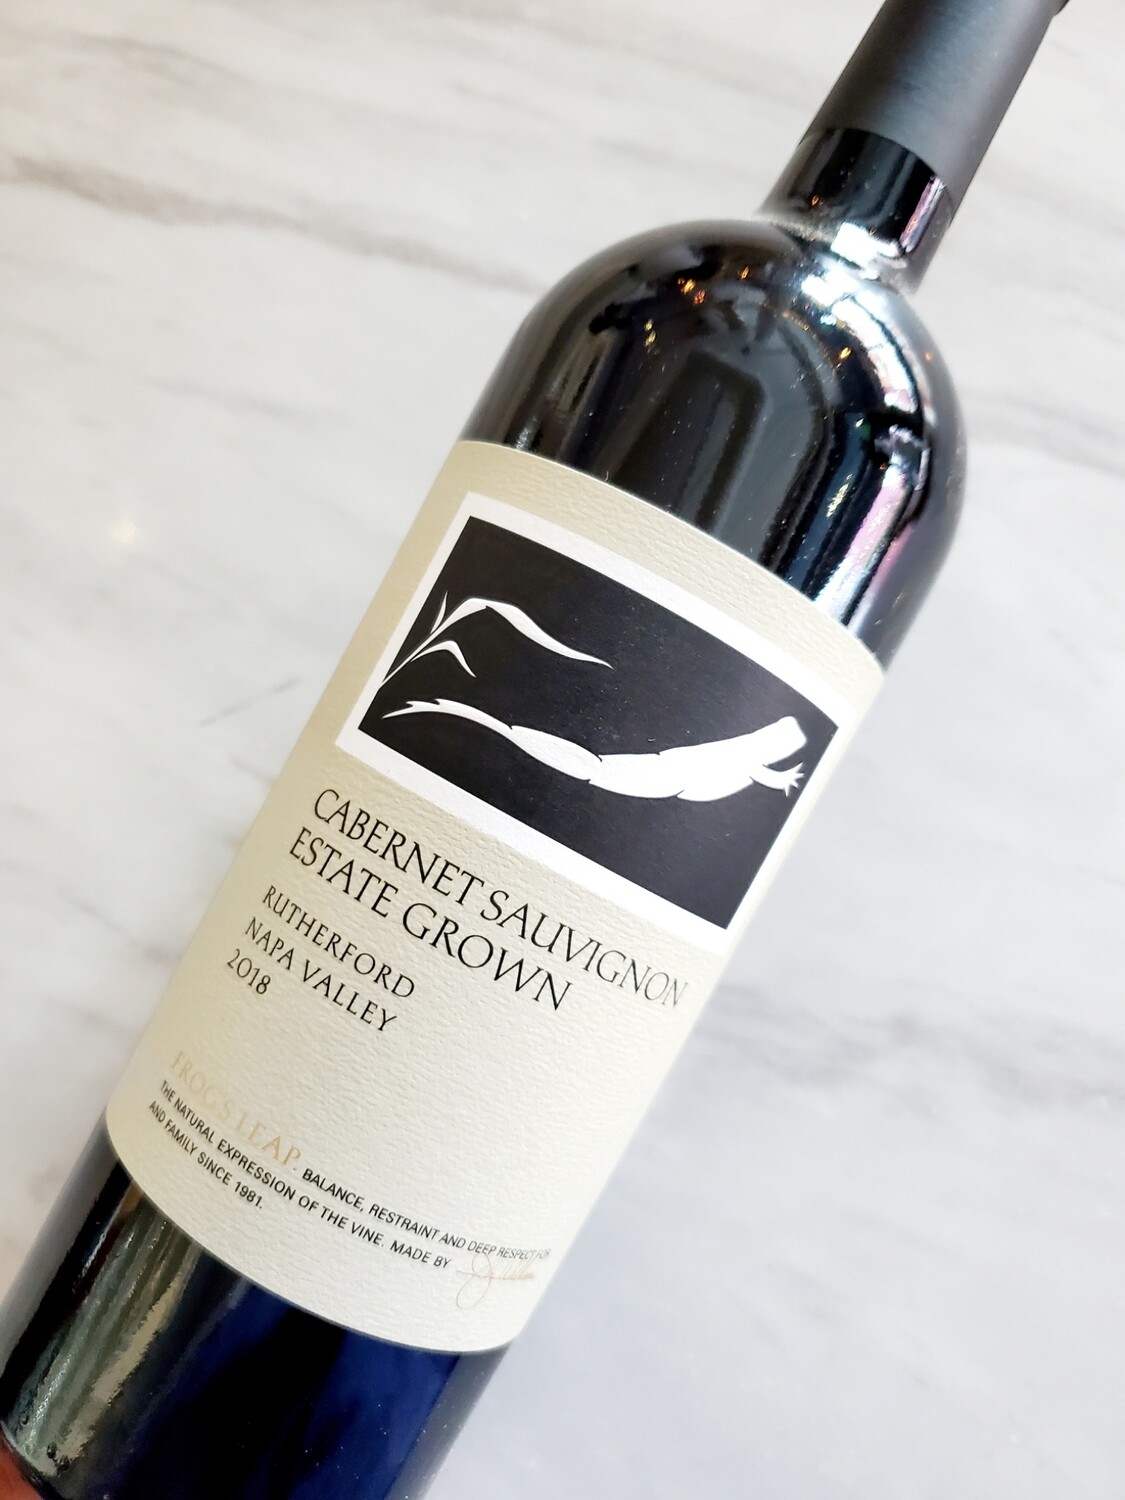 Frog's Leap Cabernet Sauvignon, Rutherford 2018